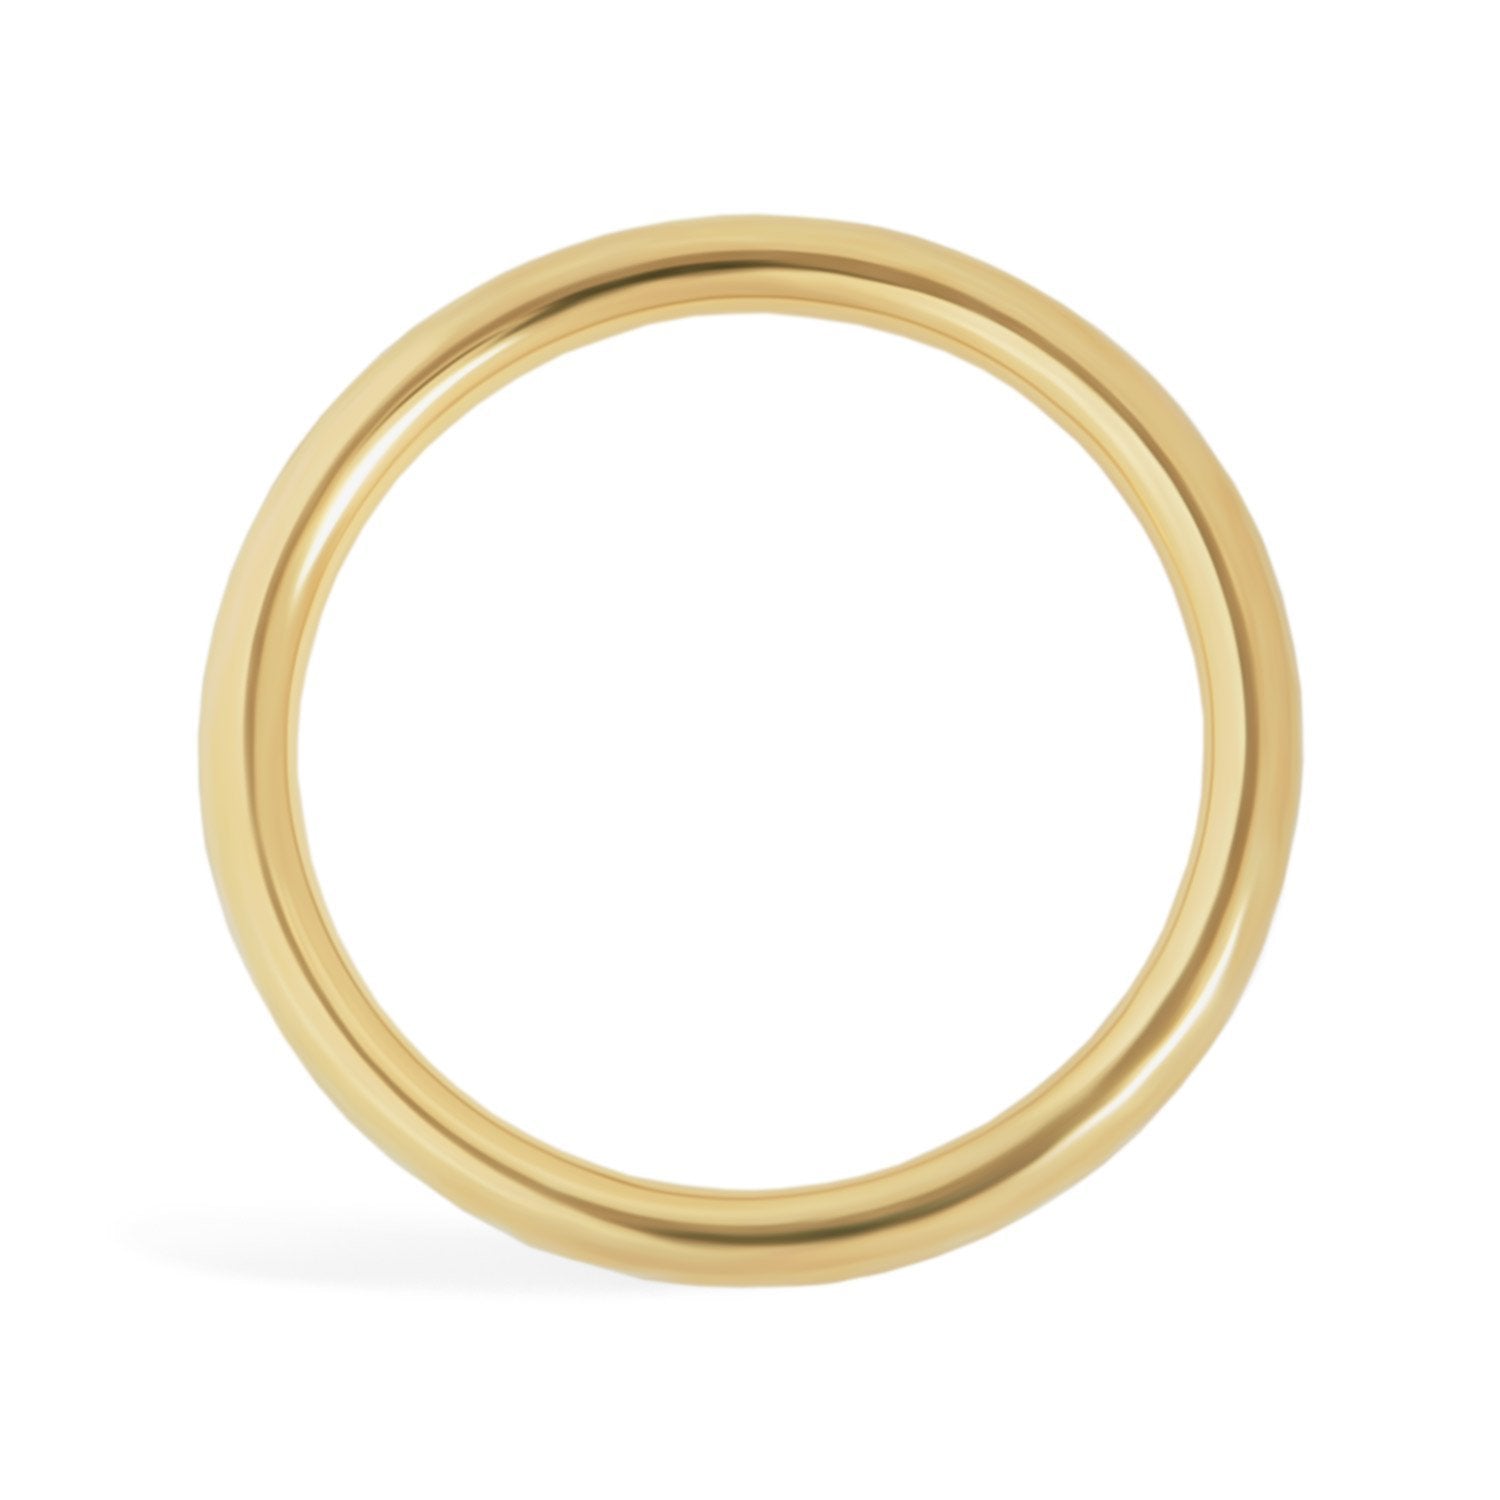 Elementary Ring 2.0 14ct gold